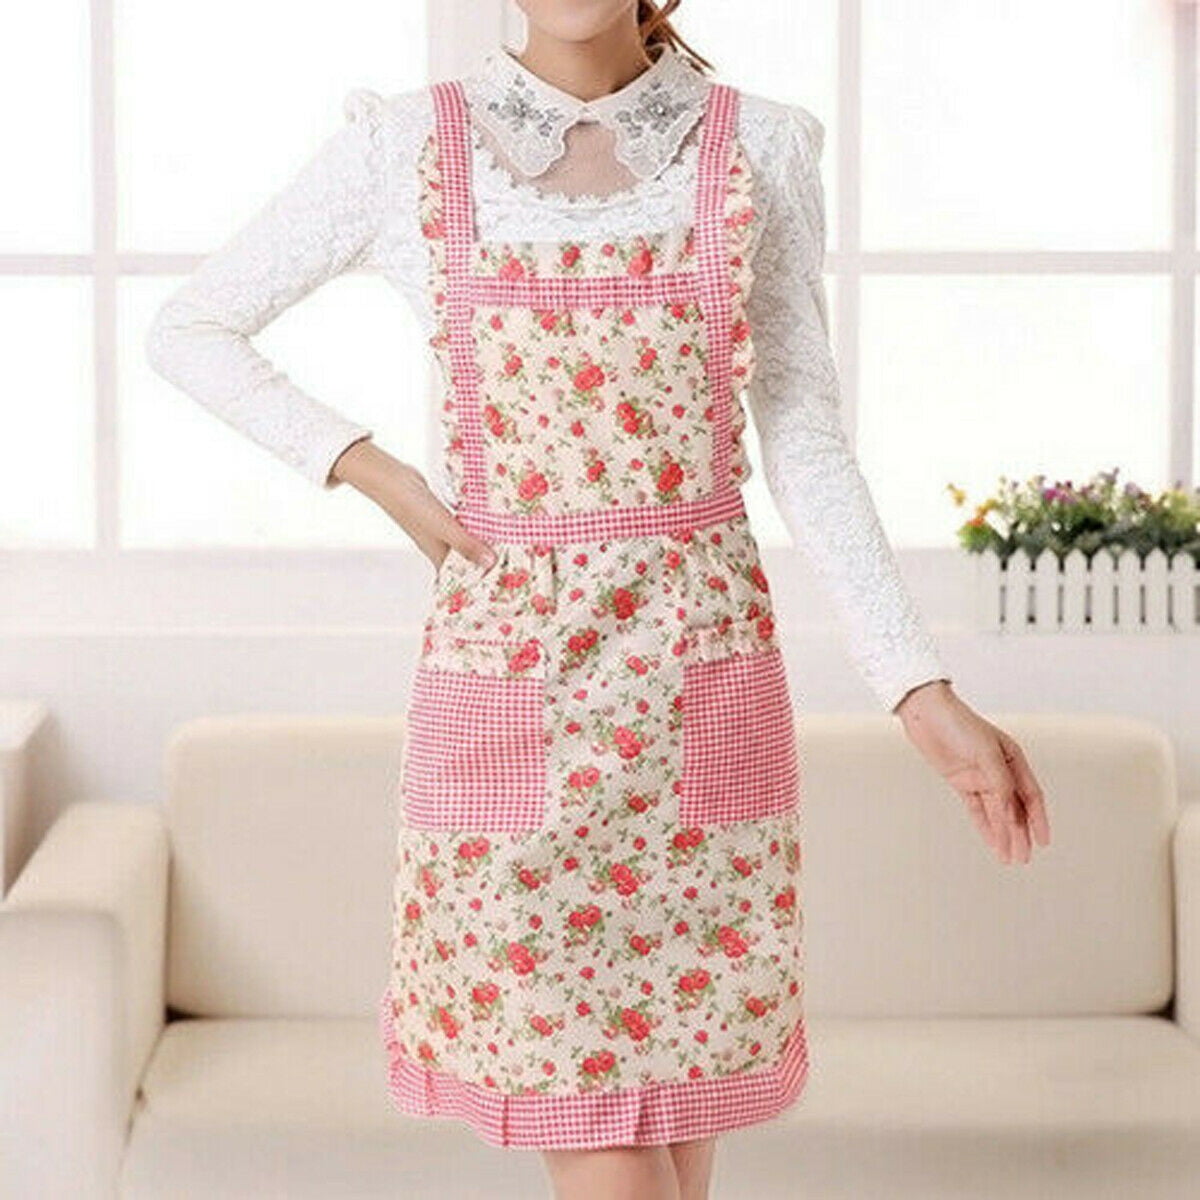 Womens Mens Cooking Aprons Chef Kitchen Restaurant Bib Apron Dress With Pocket 